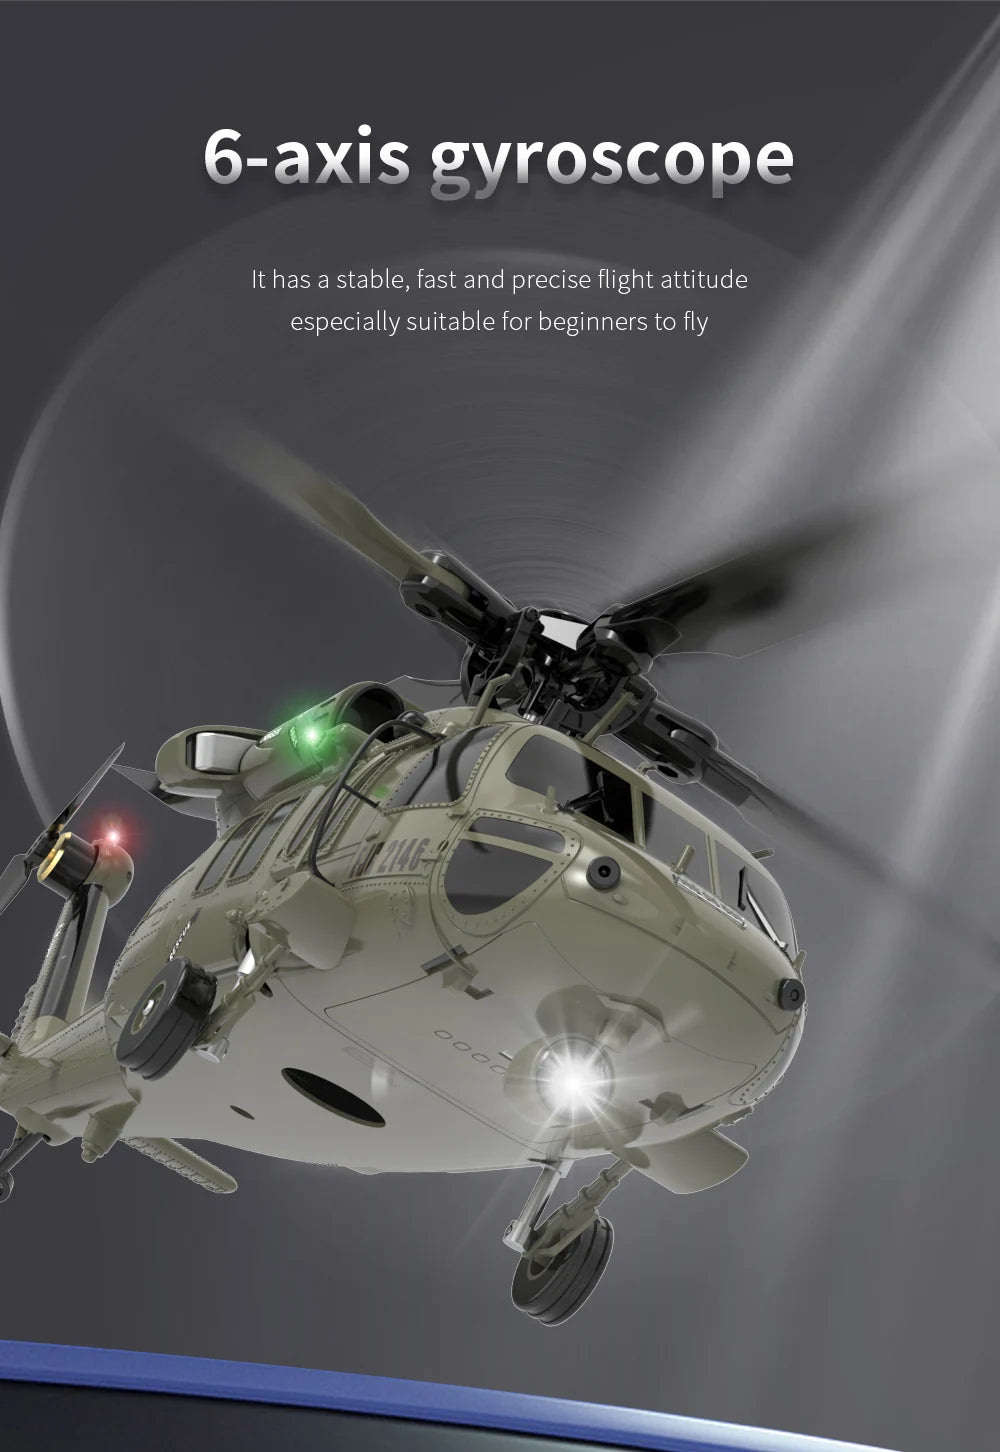 F09 6-Axis RC Helicopter, 6-axis gyroscope has a stable, fast and precise flight attitude